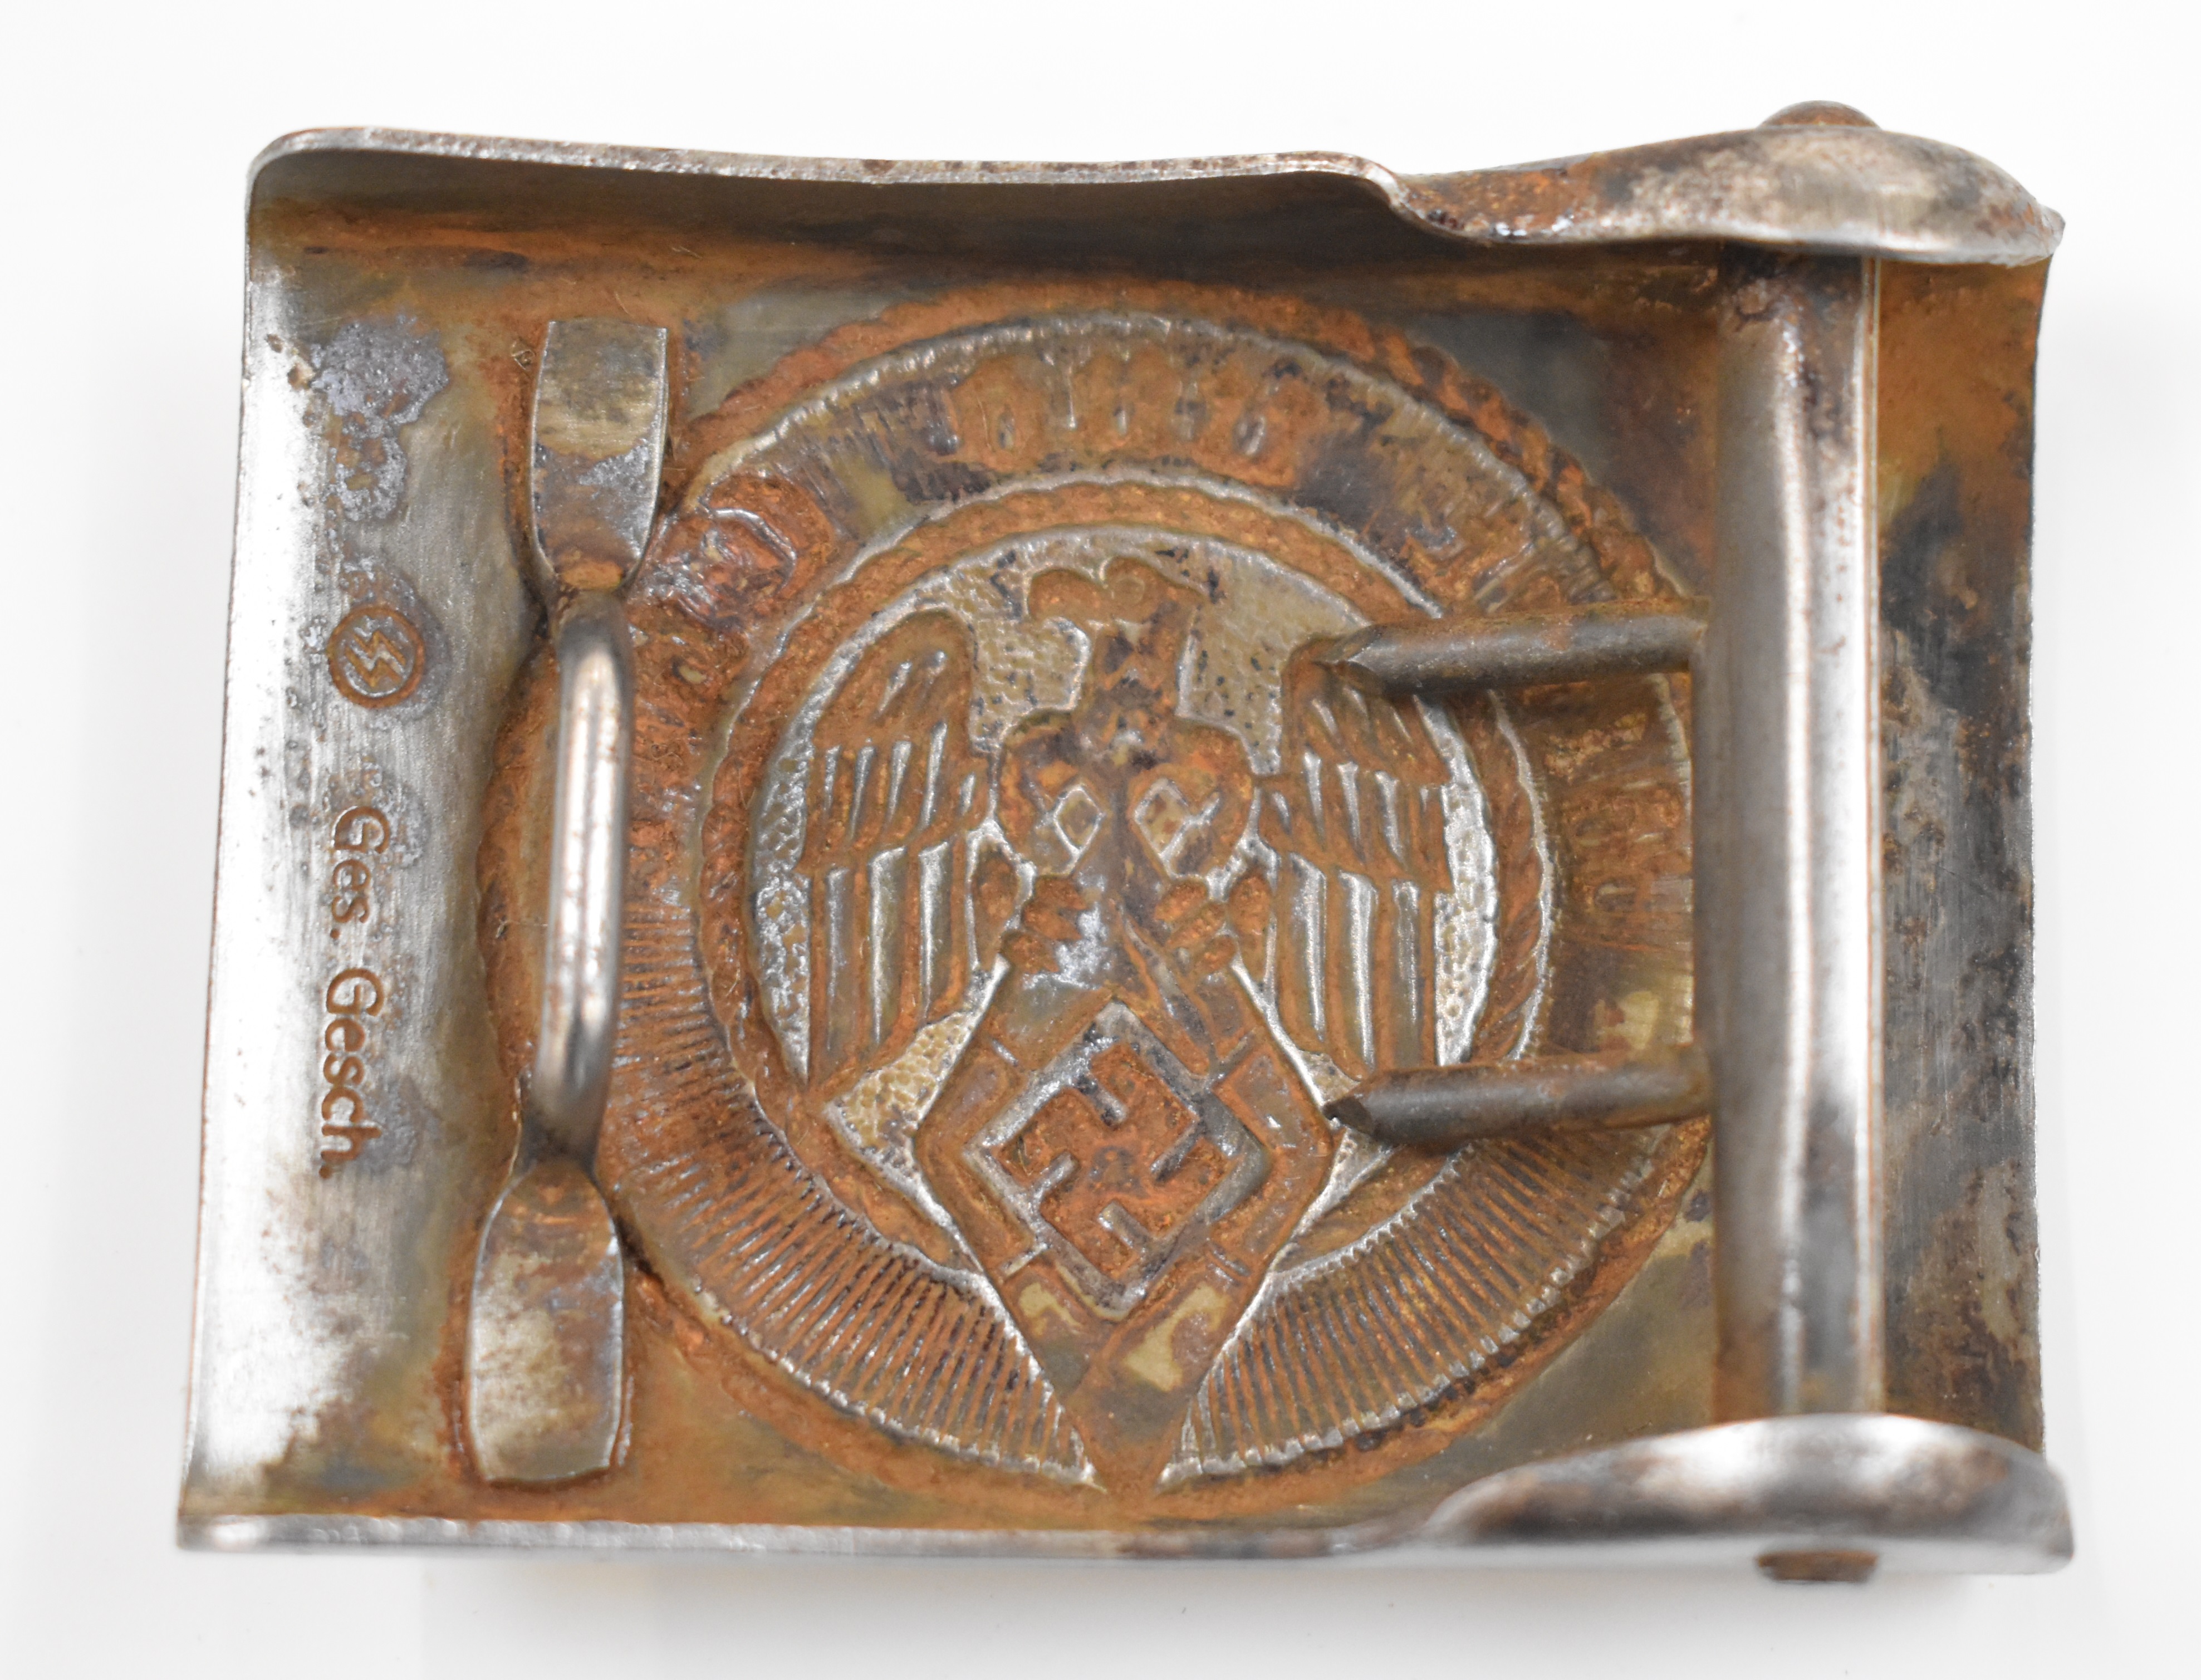 German WW2 Nazi Third Reich Hitler Youth belt buckle with Ges Gesch and maker's mark to reverse - Image 2 of 2